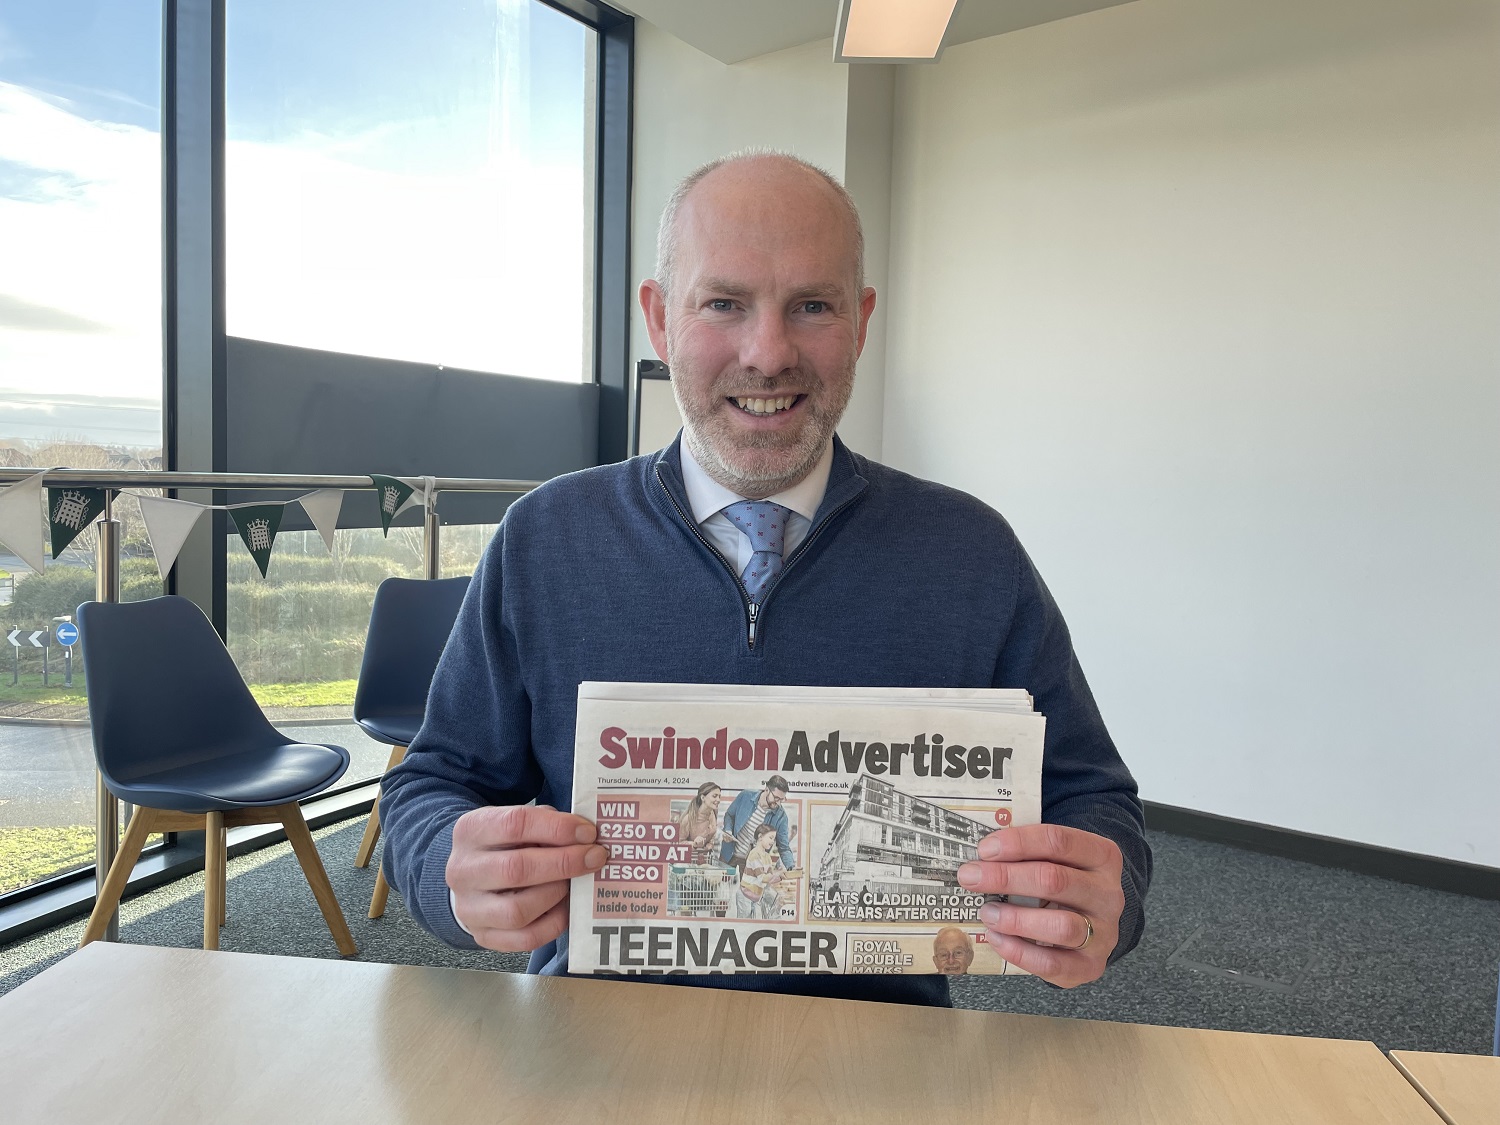 Swindon Advertiser Column - Biggest Ever Expansion Of Childcare Launched